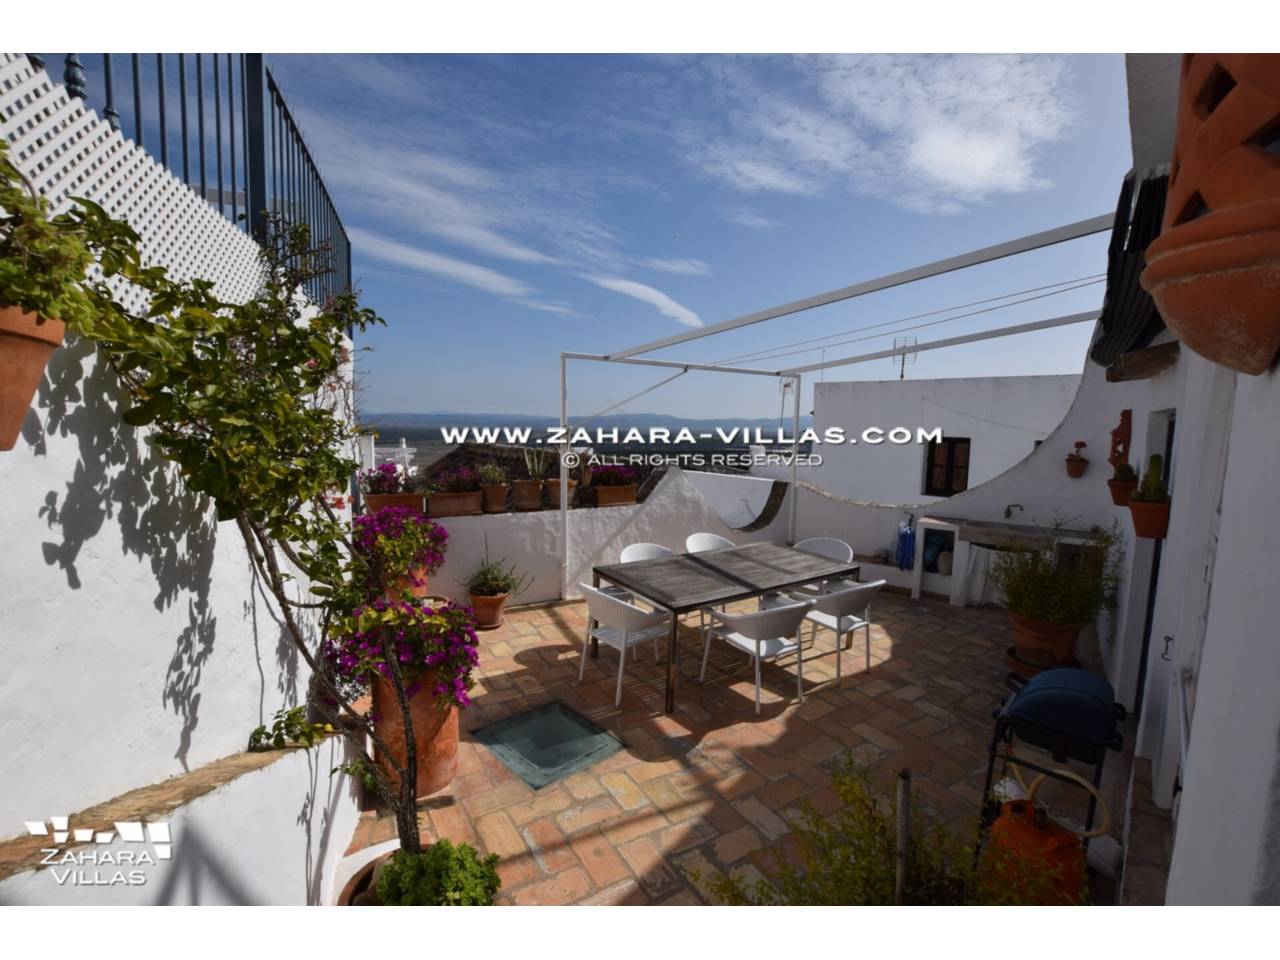 Imagen 1 de Magnificent House with central patio, in the historic center of the town